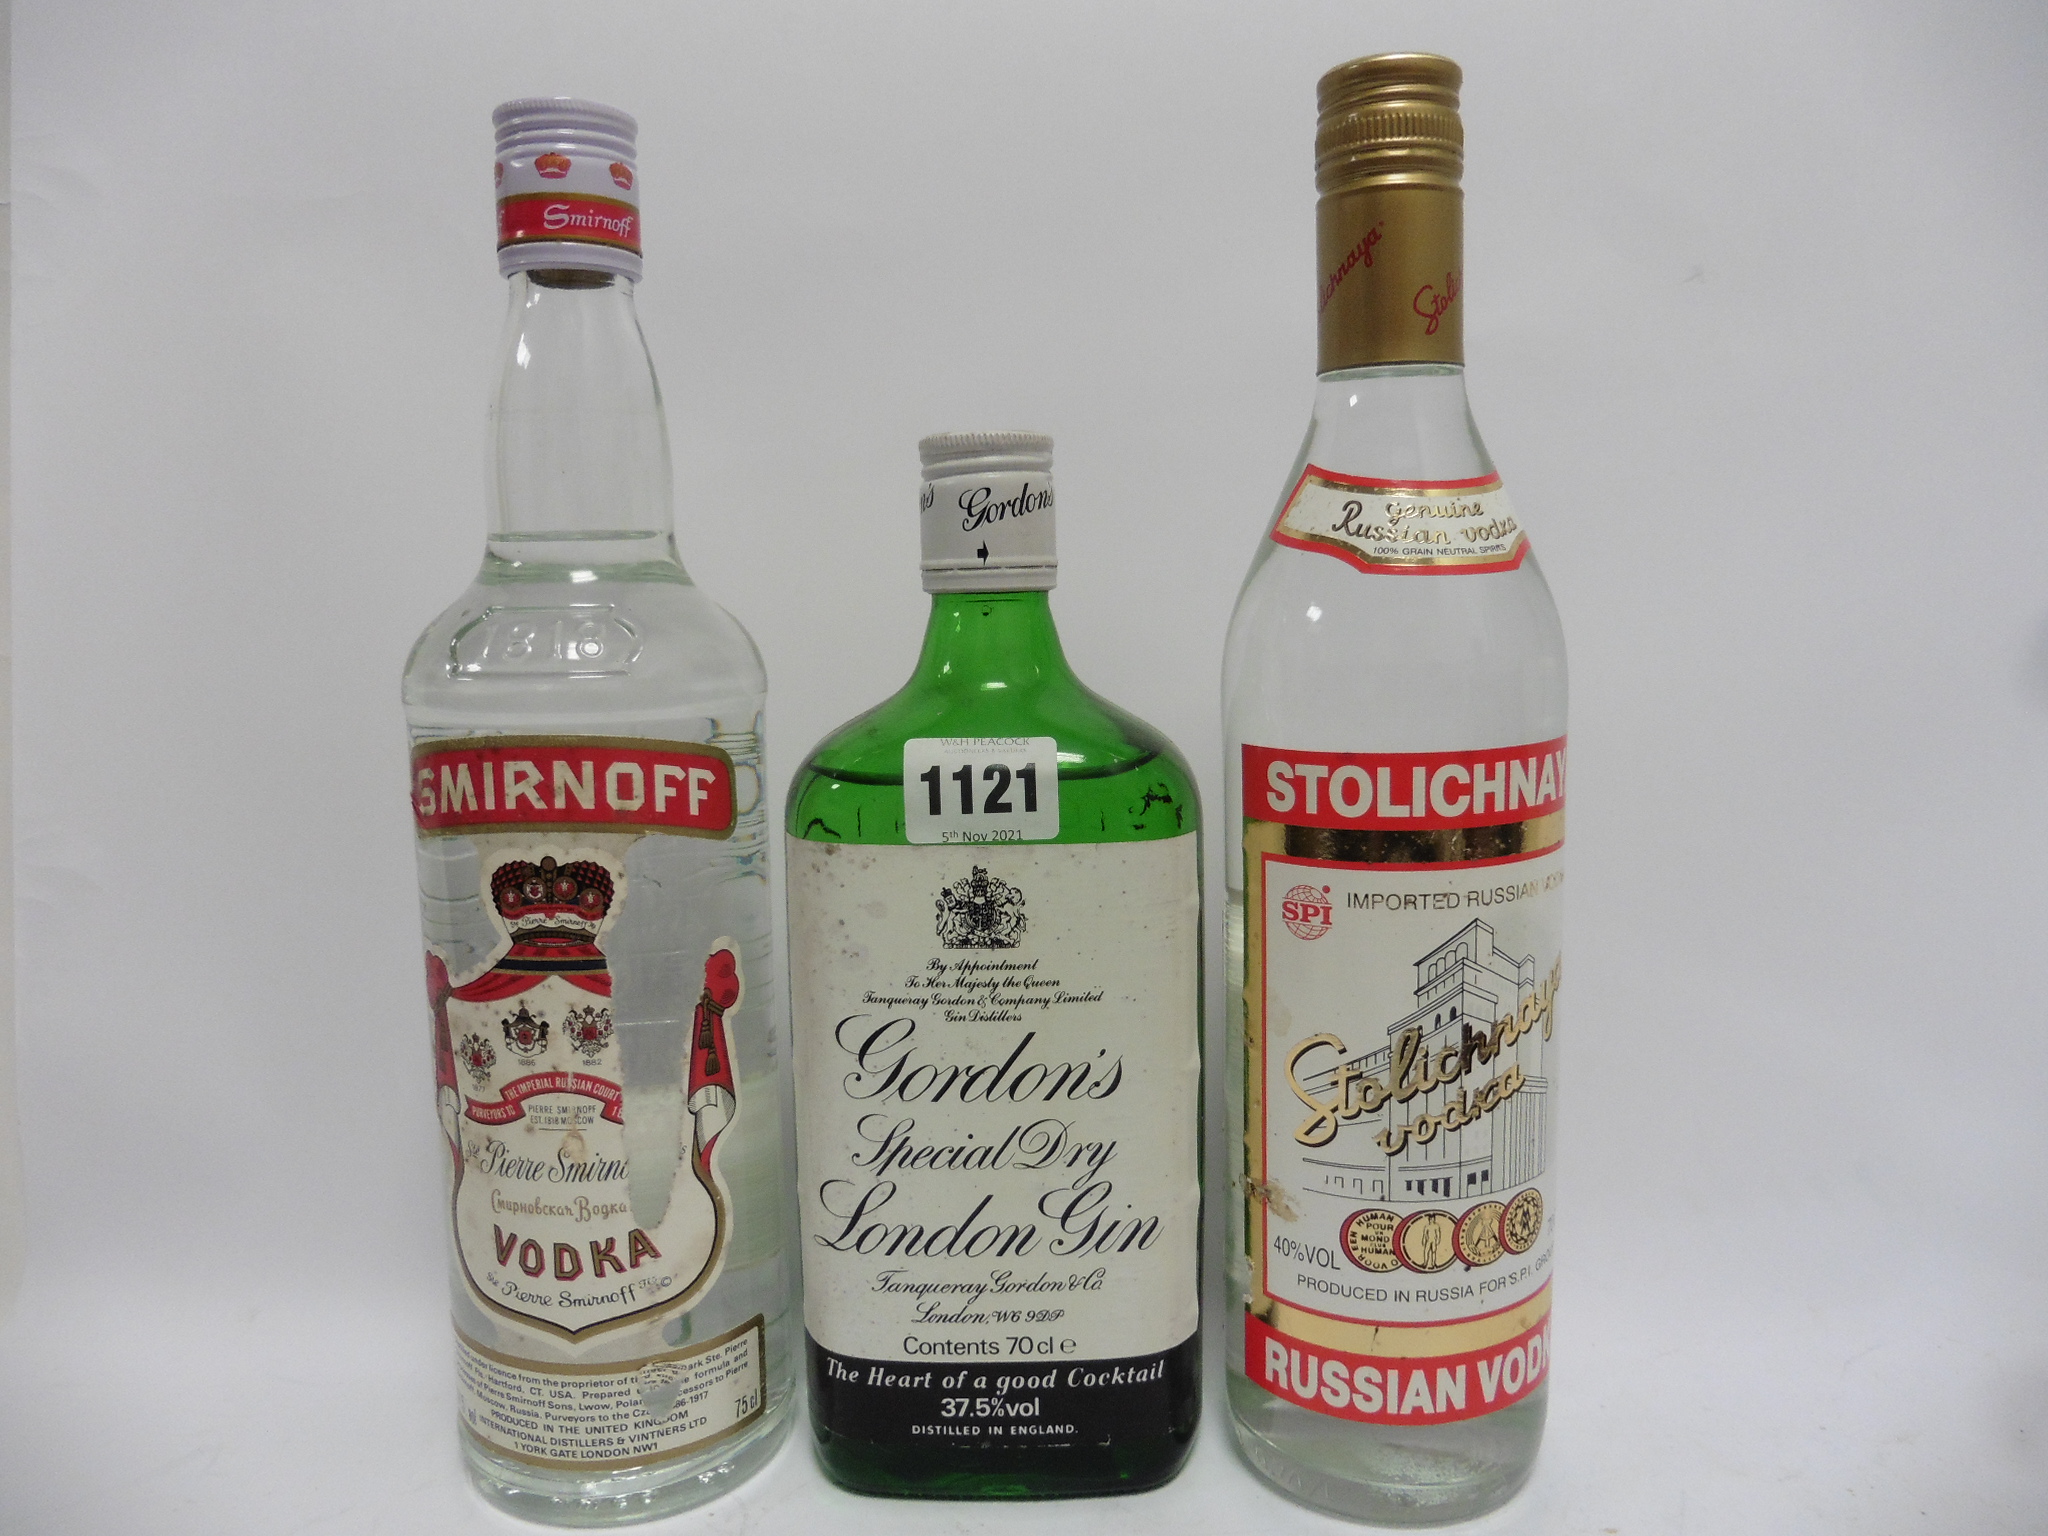 3 bottles, 1x Gordon's Special Dry London Gin old style 70cl 37.